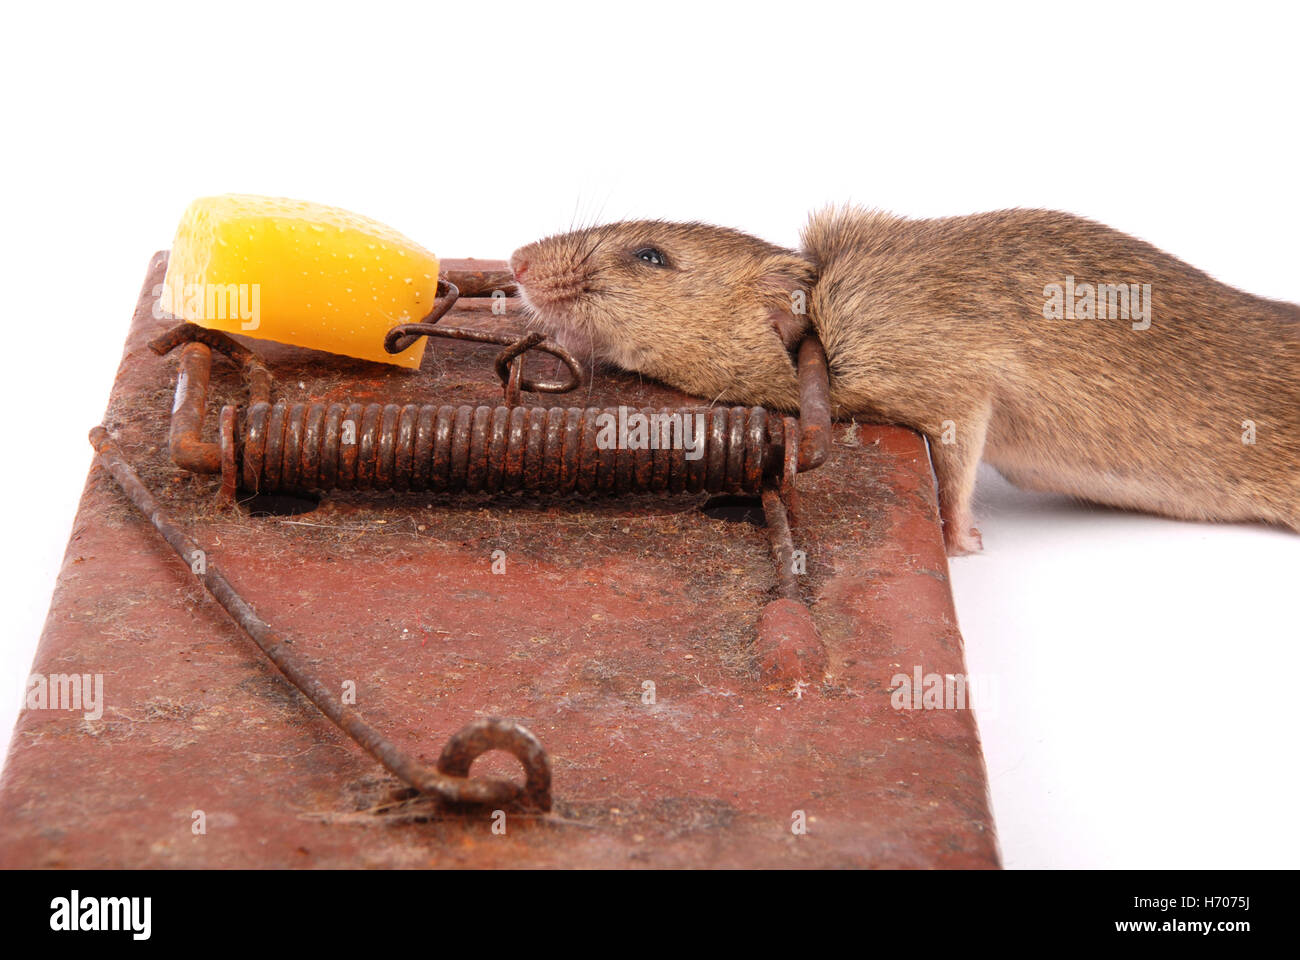 https://c8.alamy.com/comp/H7075J/mousetrap-with-dead-mouse-isolated-on-white-H7075J.jpg